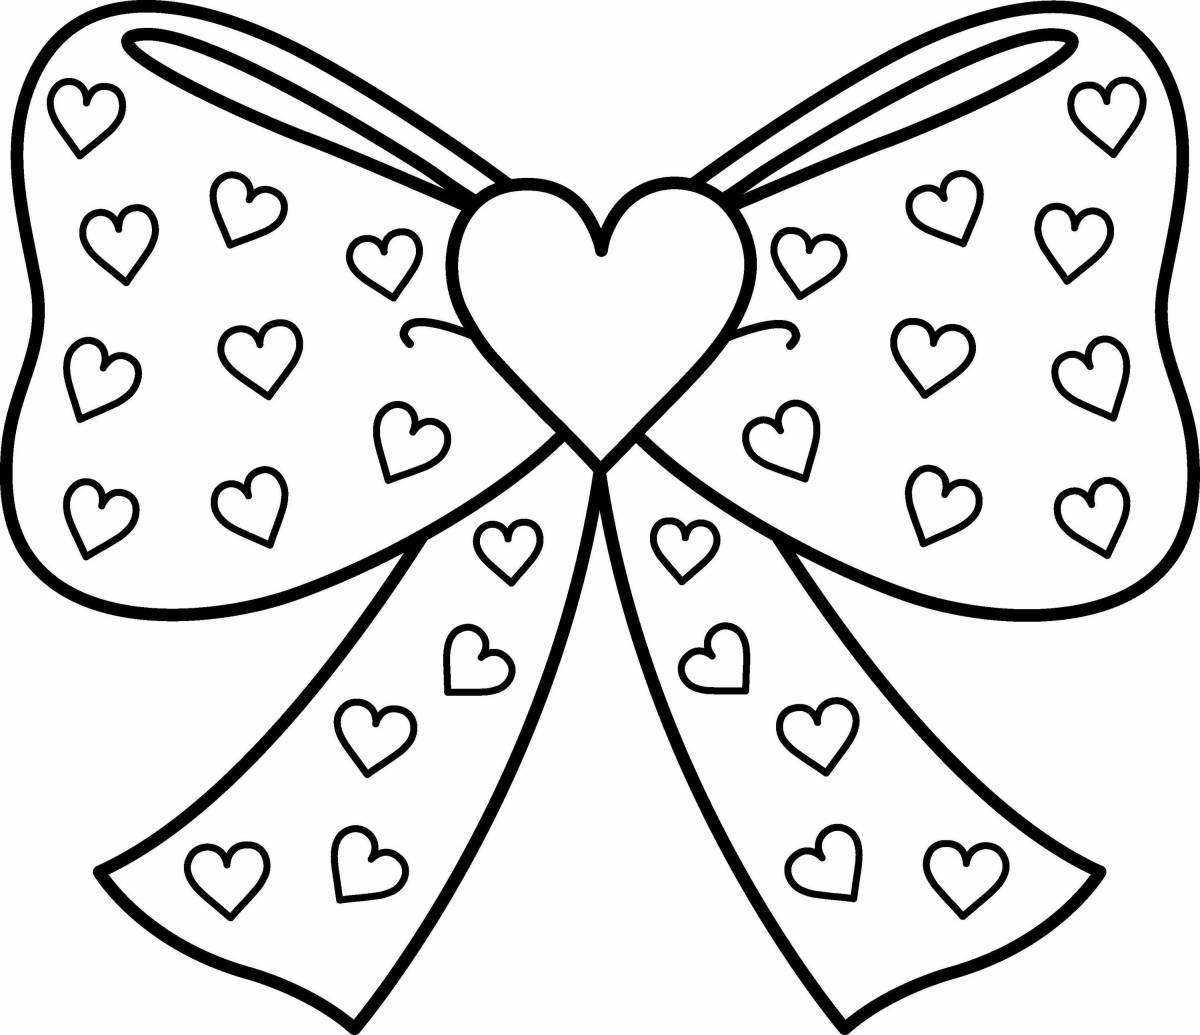 Coloring cute heart and star